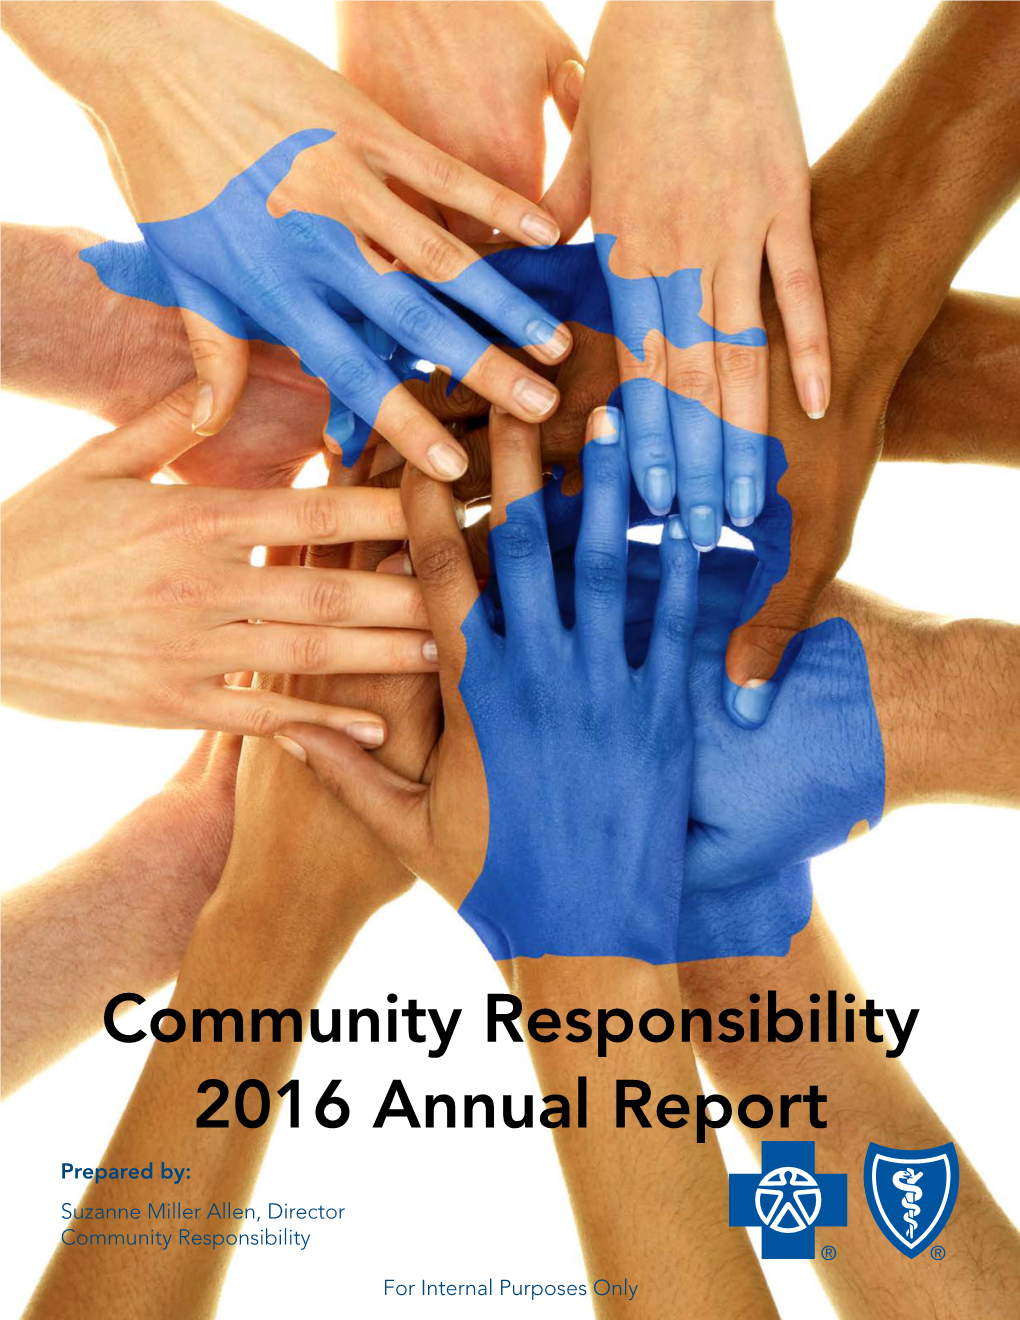 Community Responsibility 2016 Annual Report Prepared By: Suzannefor Internal Miller Purposes Allen, Only Director Community Responsibility